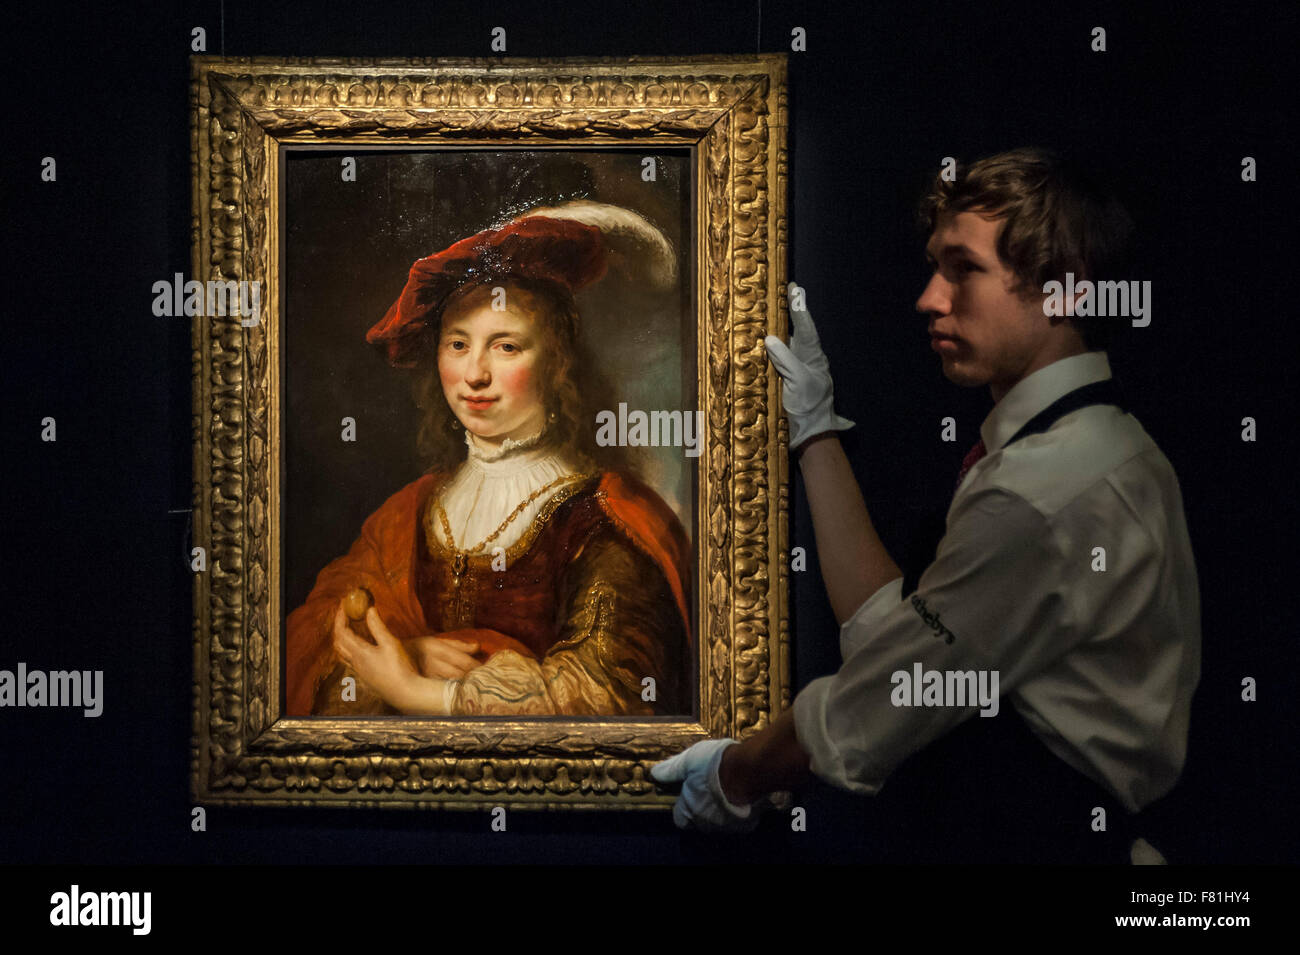 London, UK. 4 December 2015. A technician presents 'A tronie of a young woman' by Govert Flinck (est. £0.2-0.3 million) ahead of Sotheby's London evening sale of Old Master and British paintings on 9th December 2015. Credit:  Stephen Chung/Alamy Live News Stock Photo